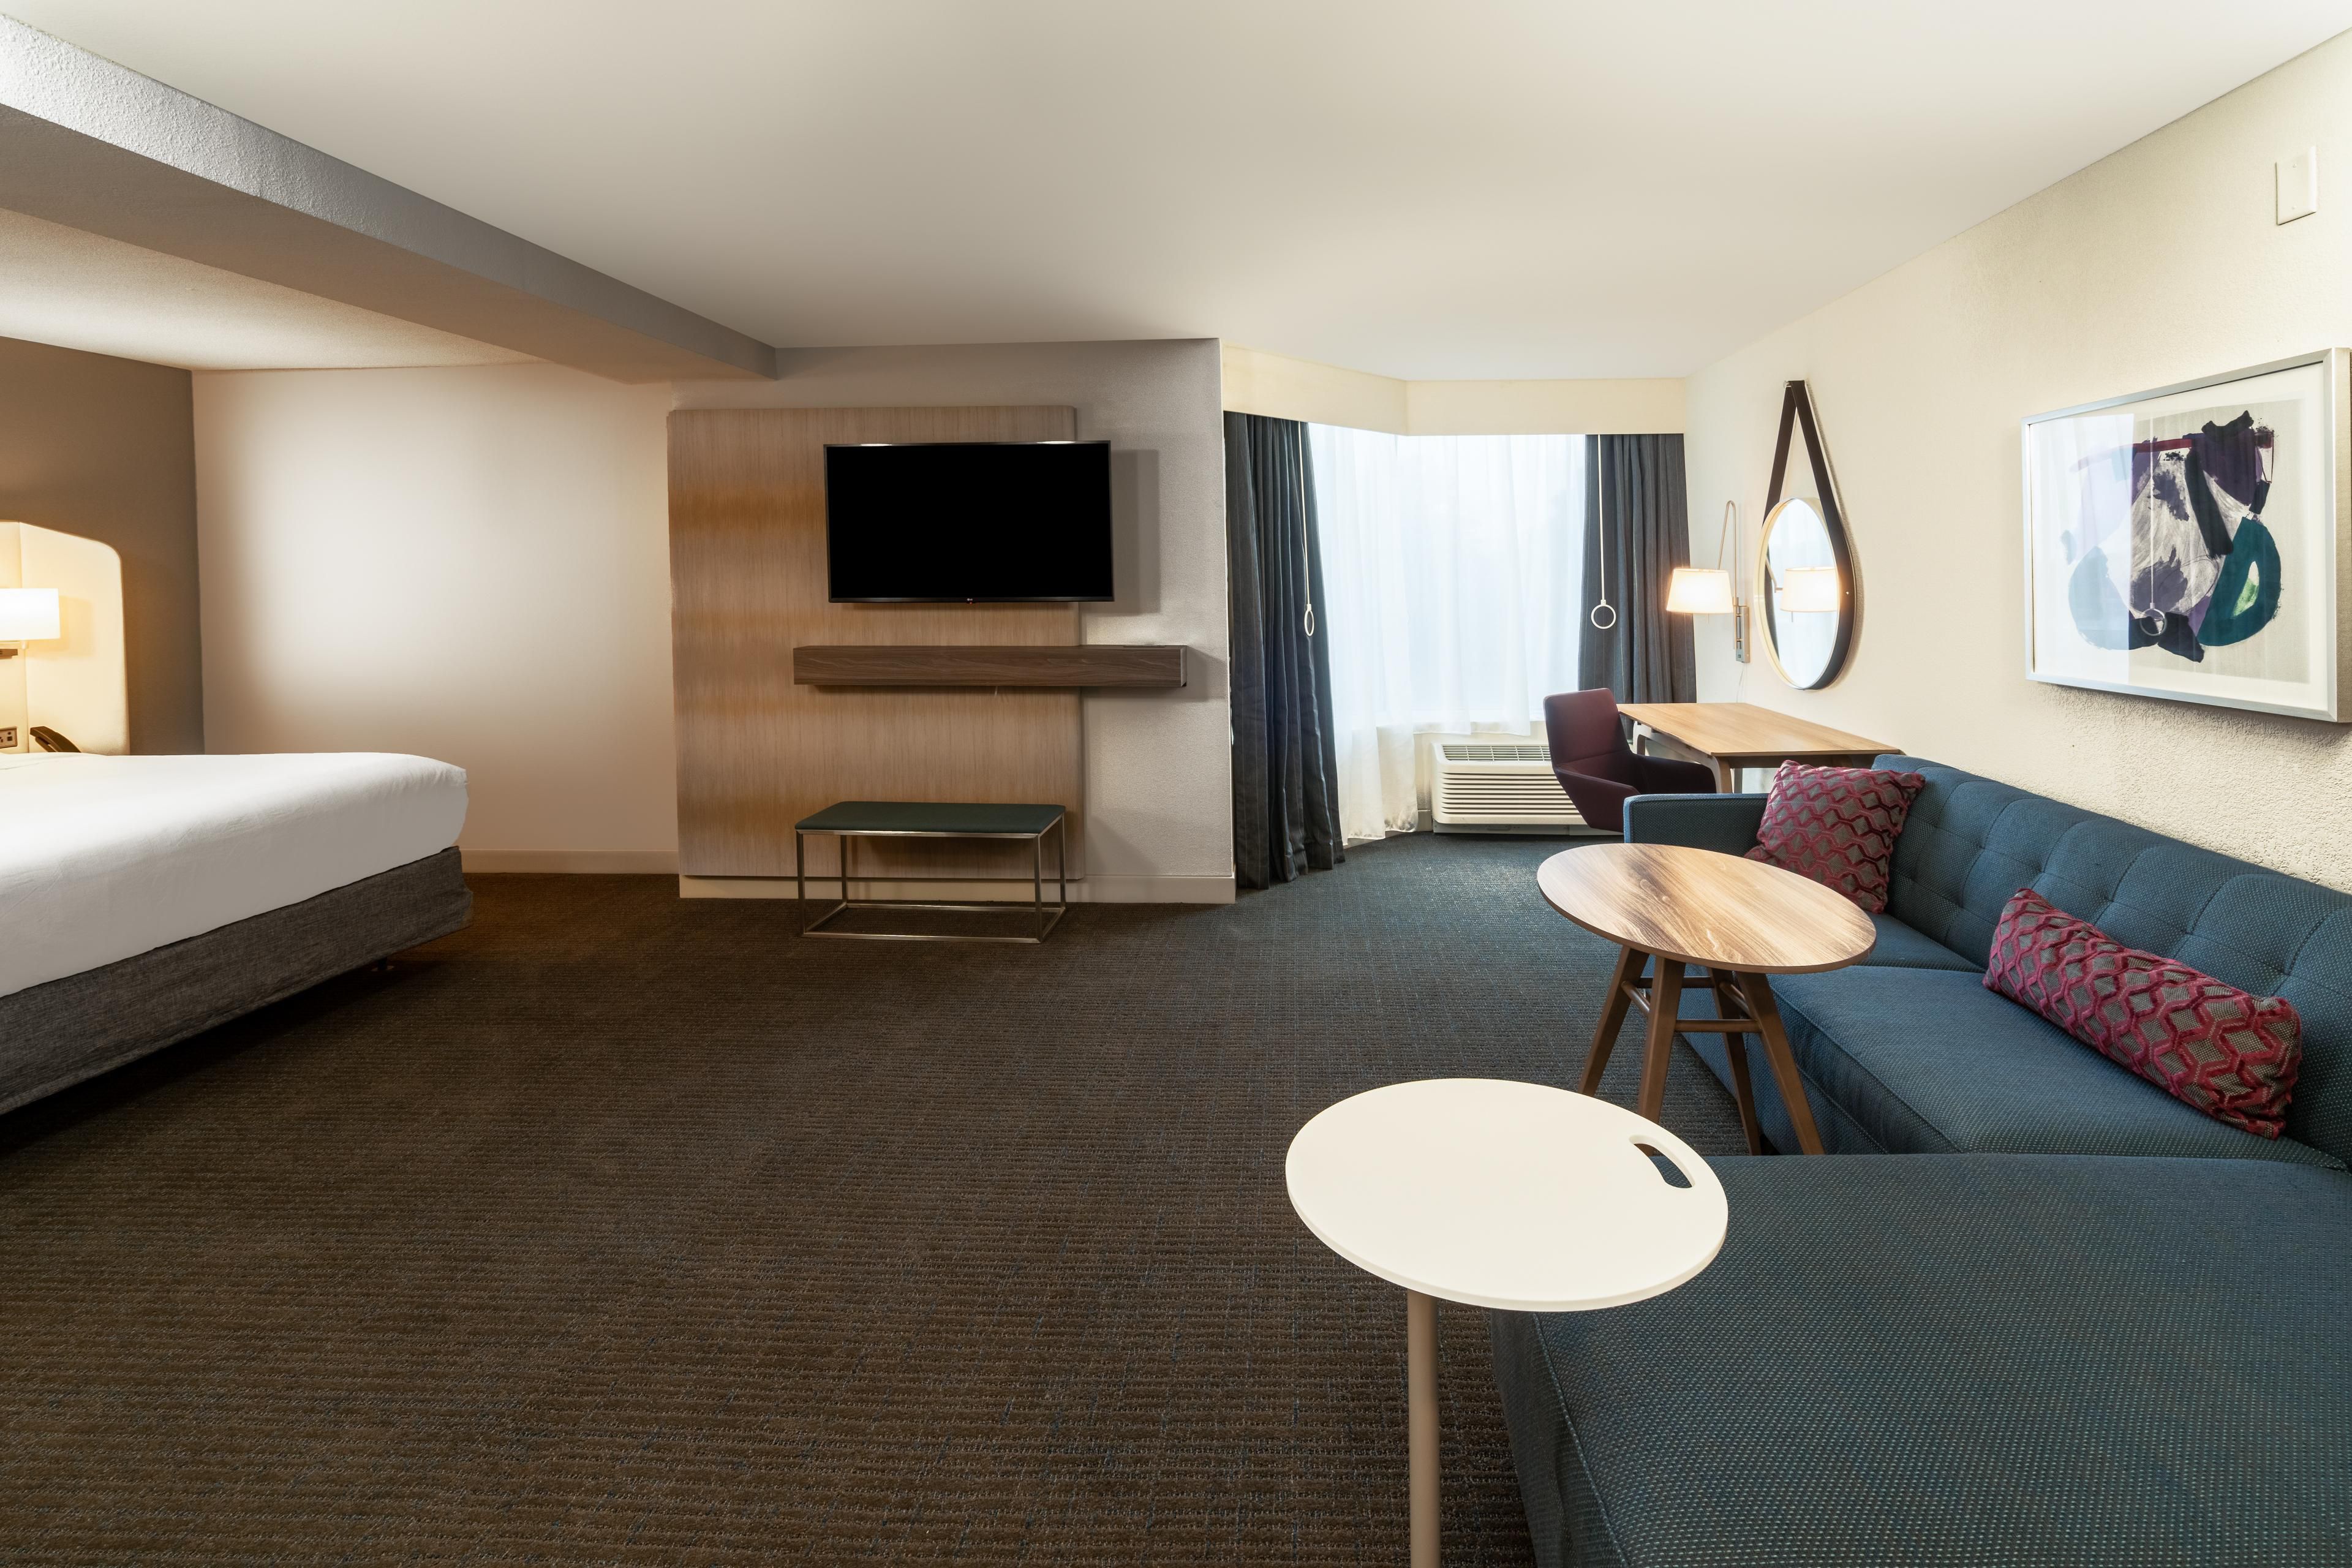 Our Junior Suites have separate seating and sleeping space!